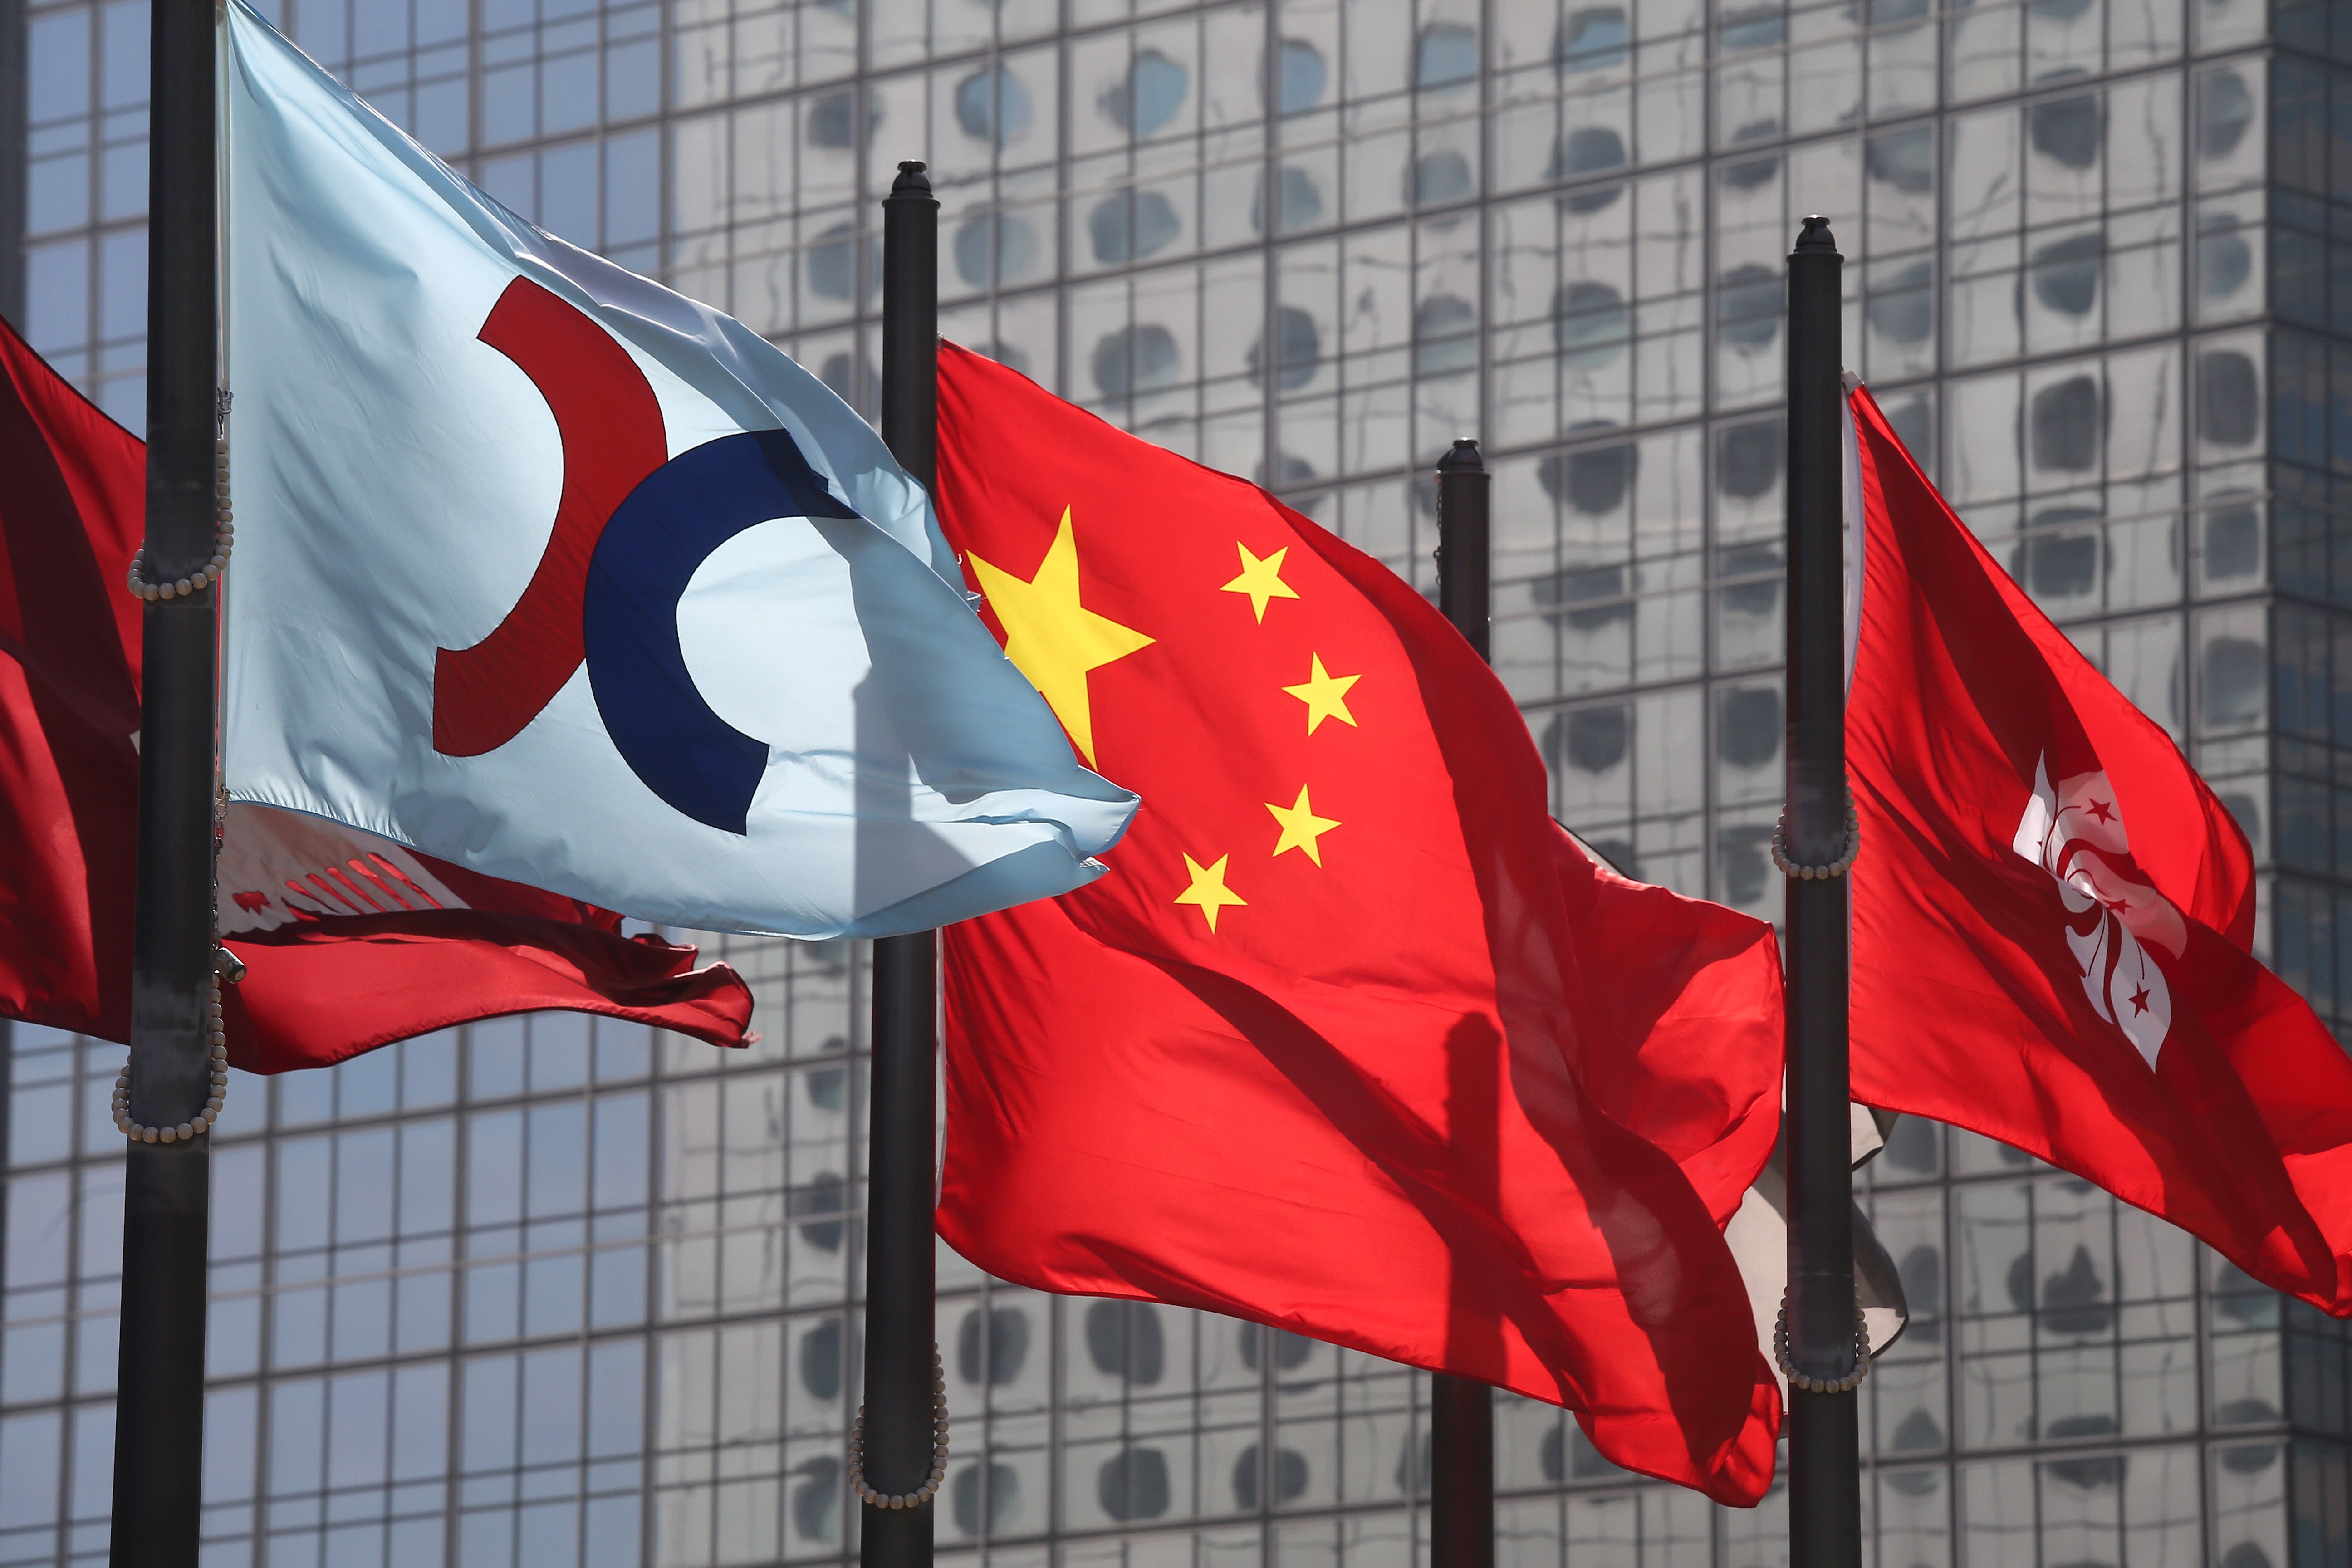 The Hong Kong stock exchange, China and Hong Kong flags flutter outside the Hong Kong stock exchange in Central. Photo: SCMP